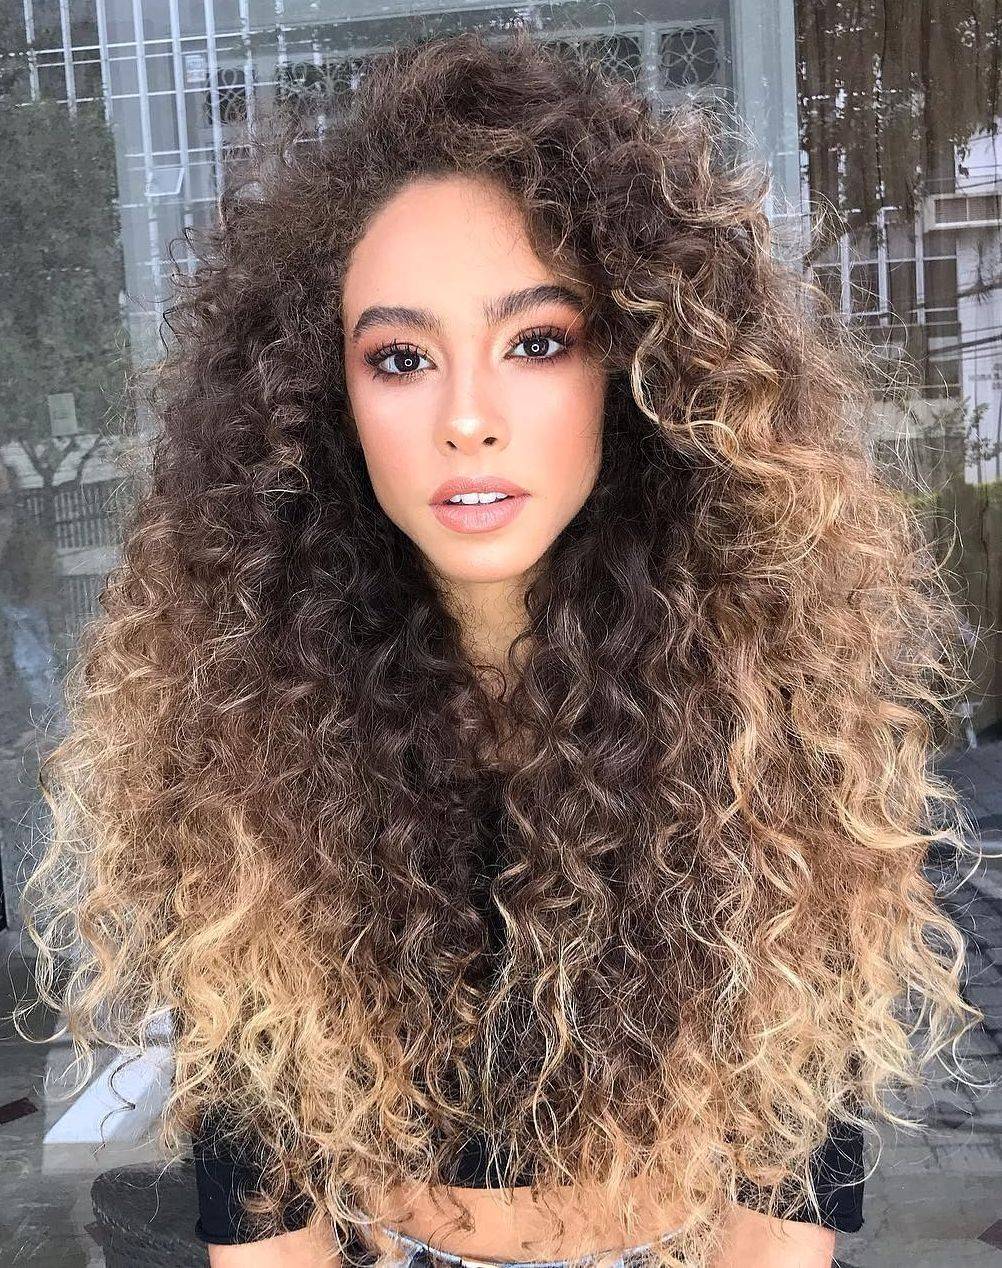 40 Chic Hairstyles for Women That Will Be Huge in 2021